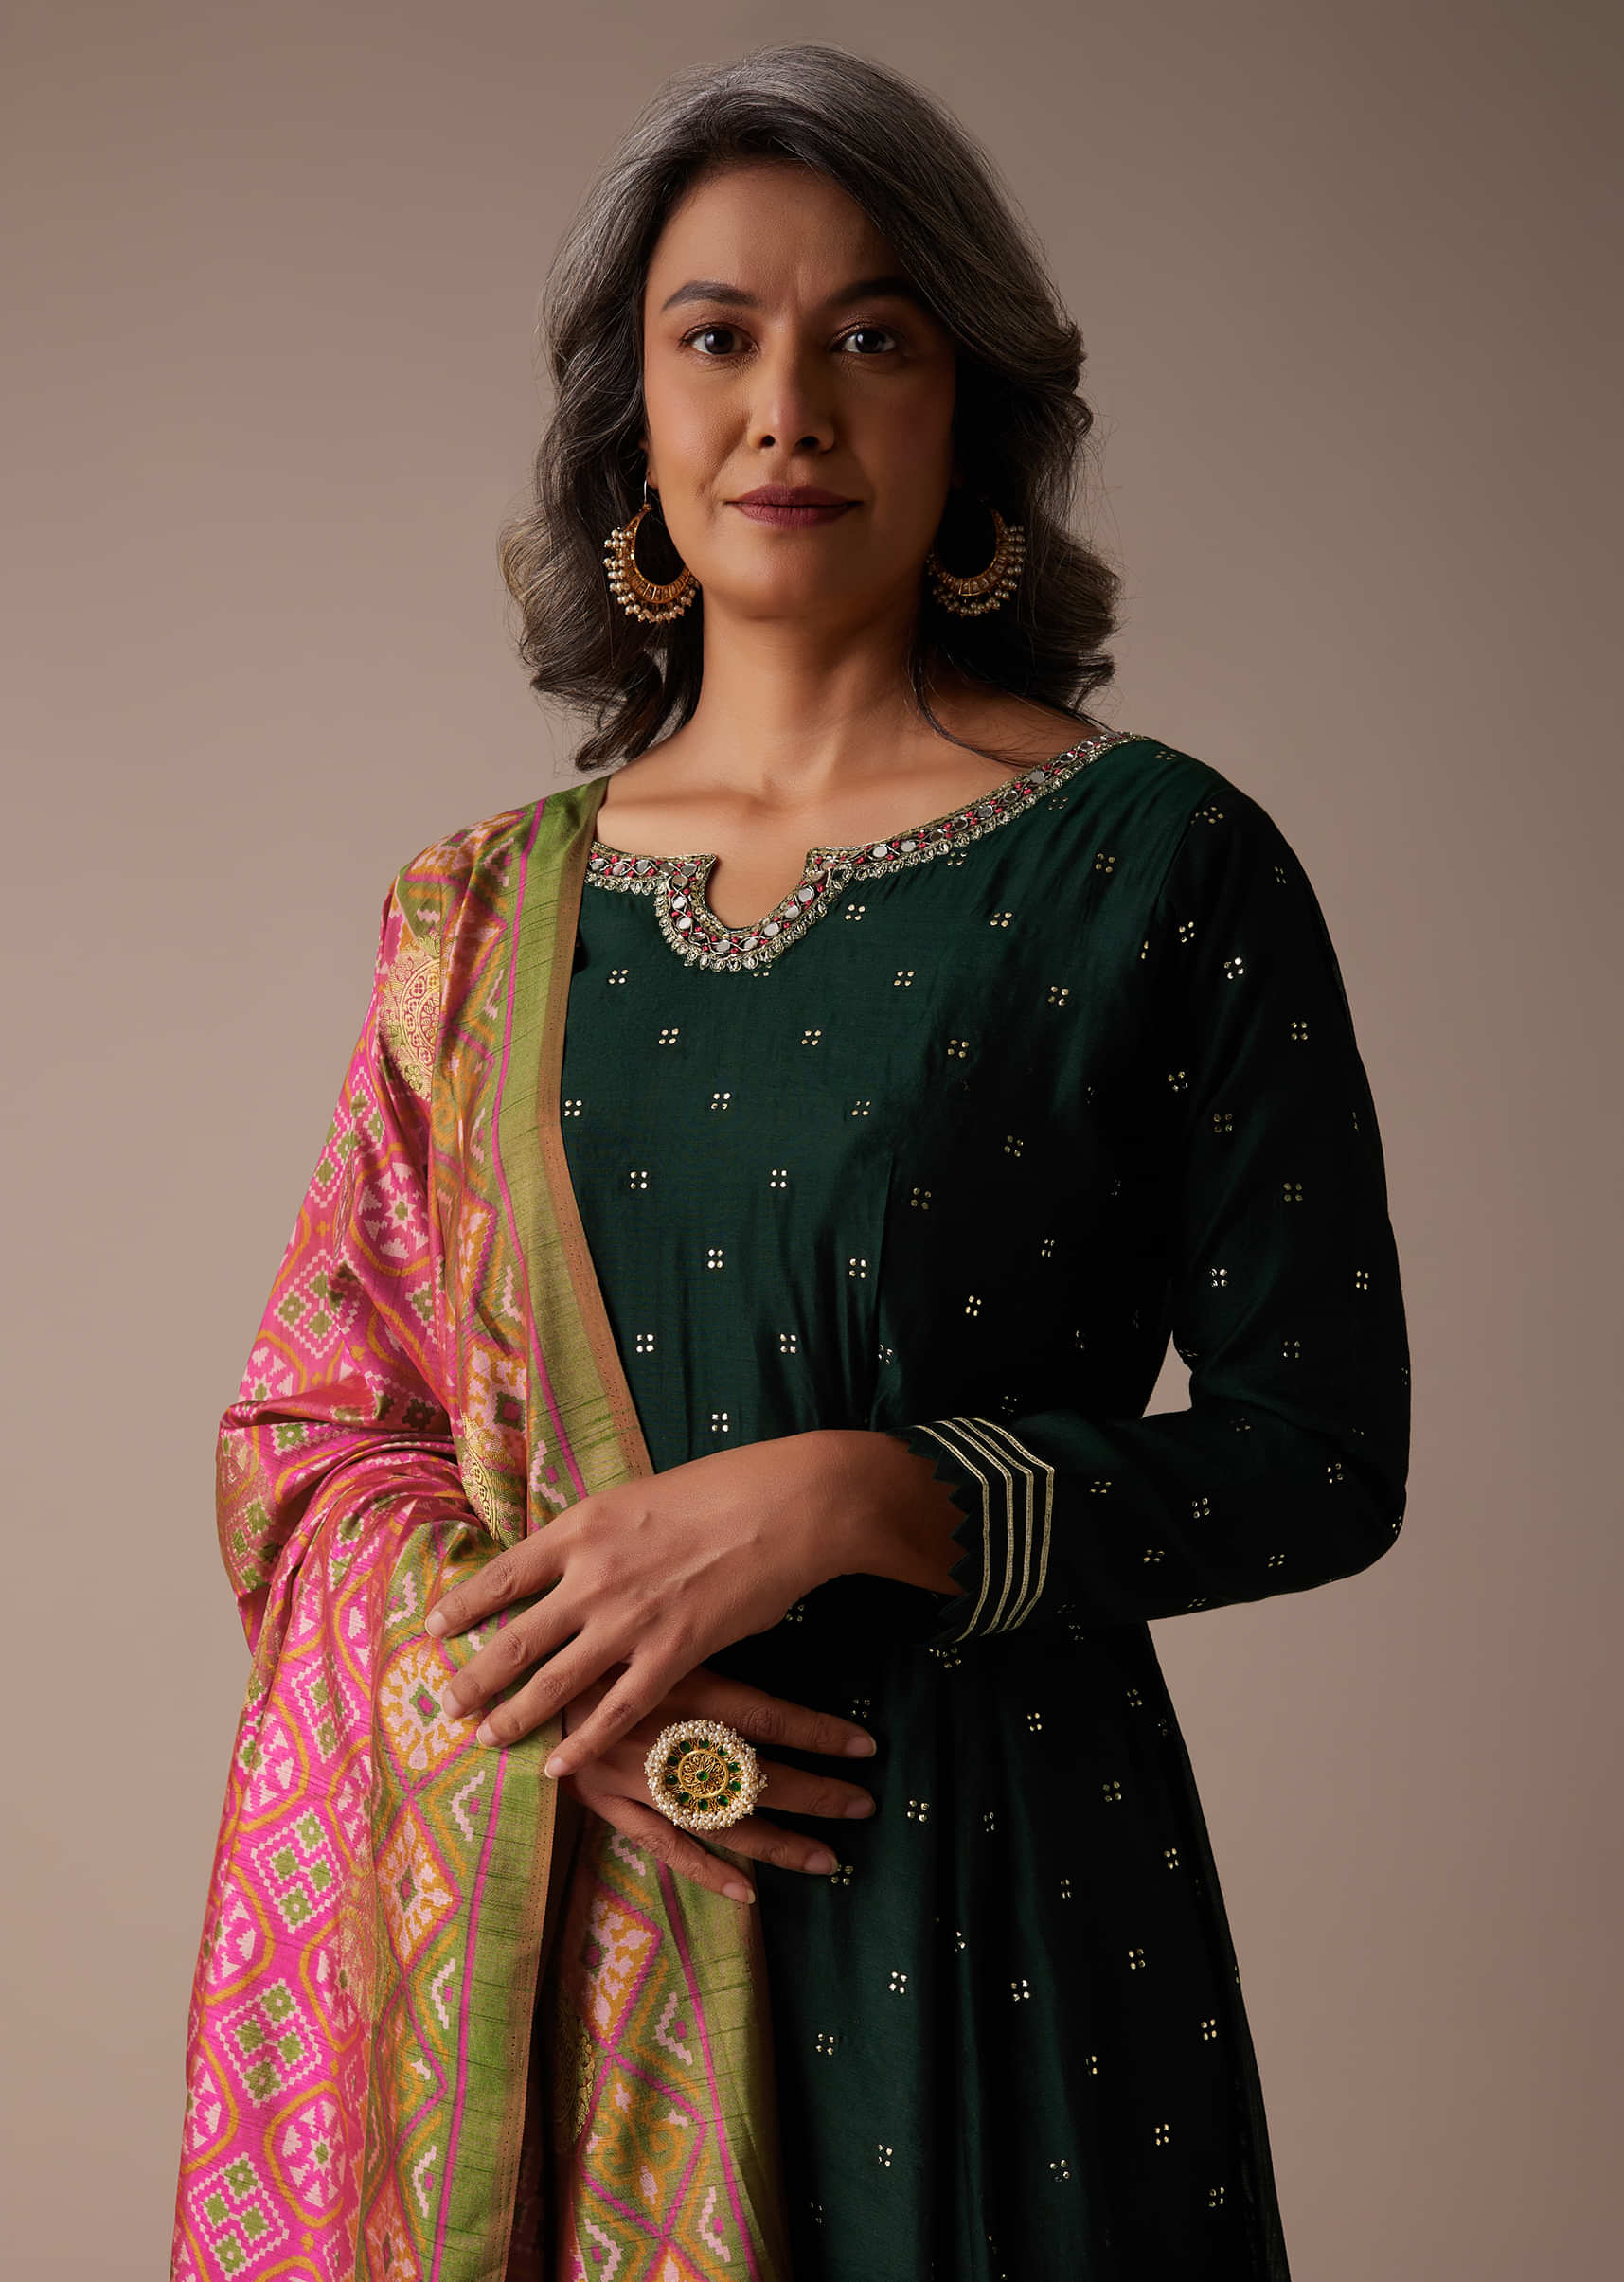 Hunter Green Anarkali Suit In Silk With Badla Buttis And Patola Printed Silk Dupatta  